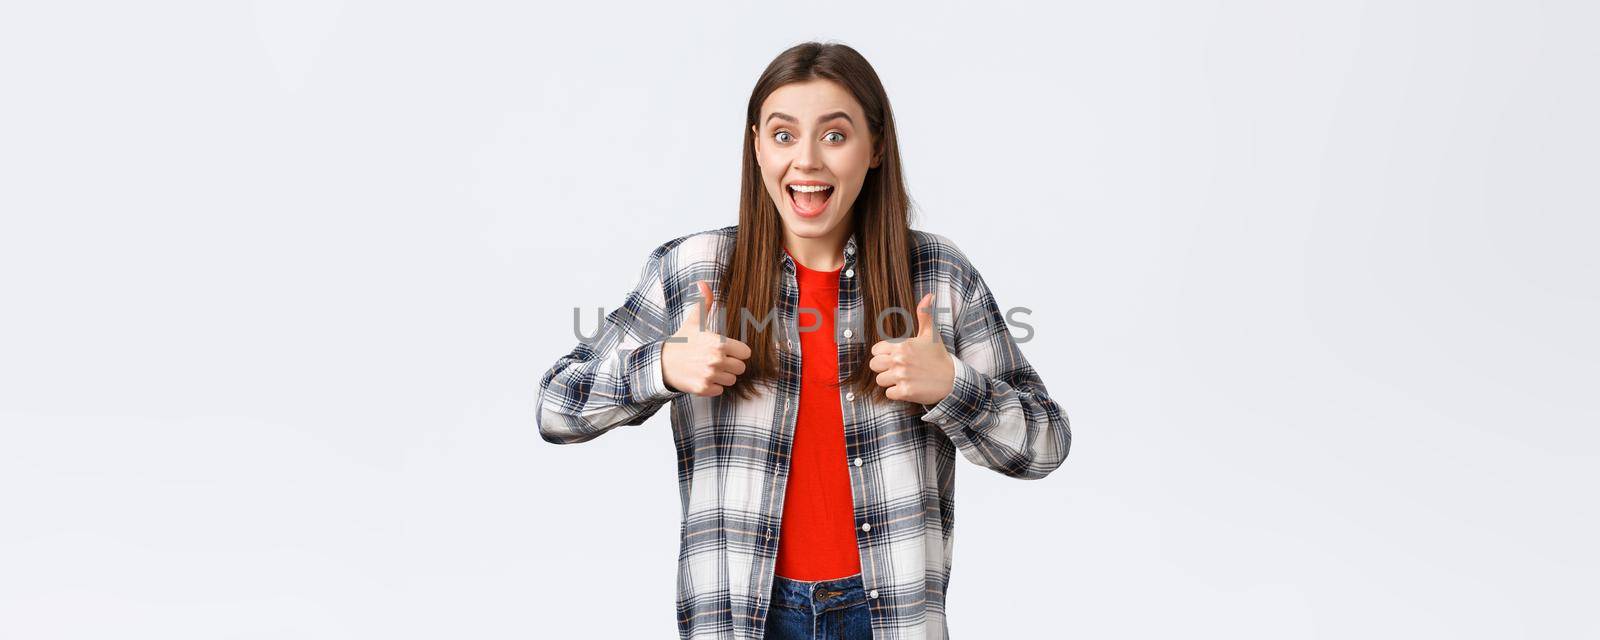 Lifestyle, different emotions, leisure activities concept. Super good idea. Cheerful excited pretty woman in casual checked shirt, thumbs-up and smiling, approving, like idea or support your choice.